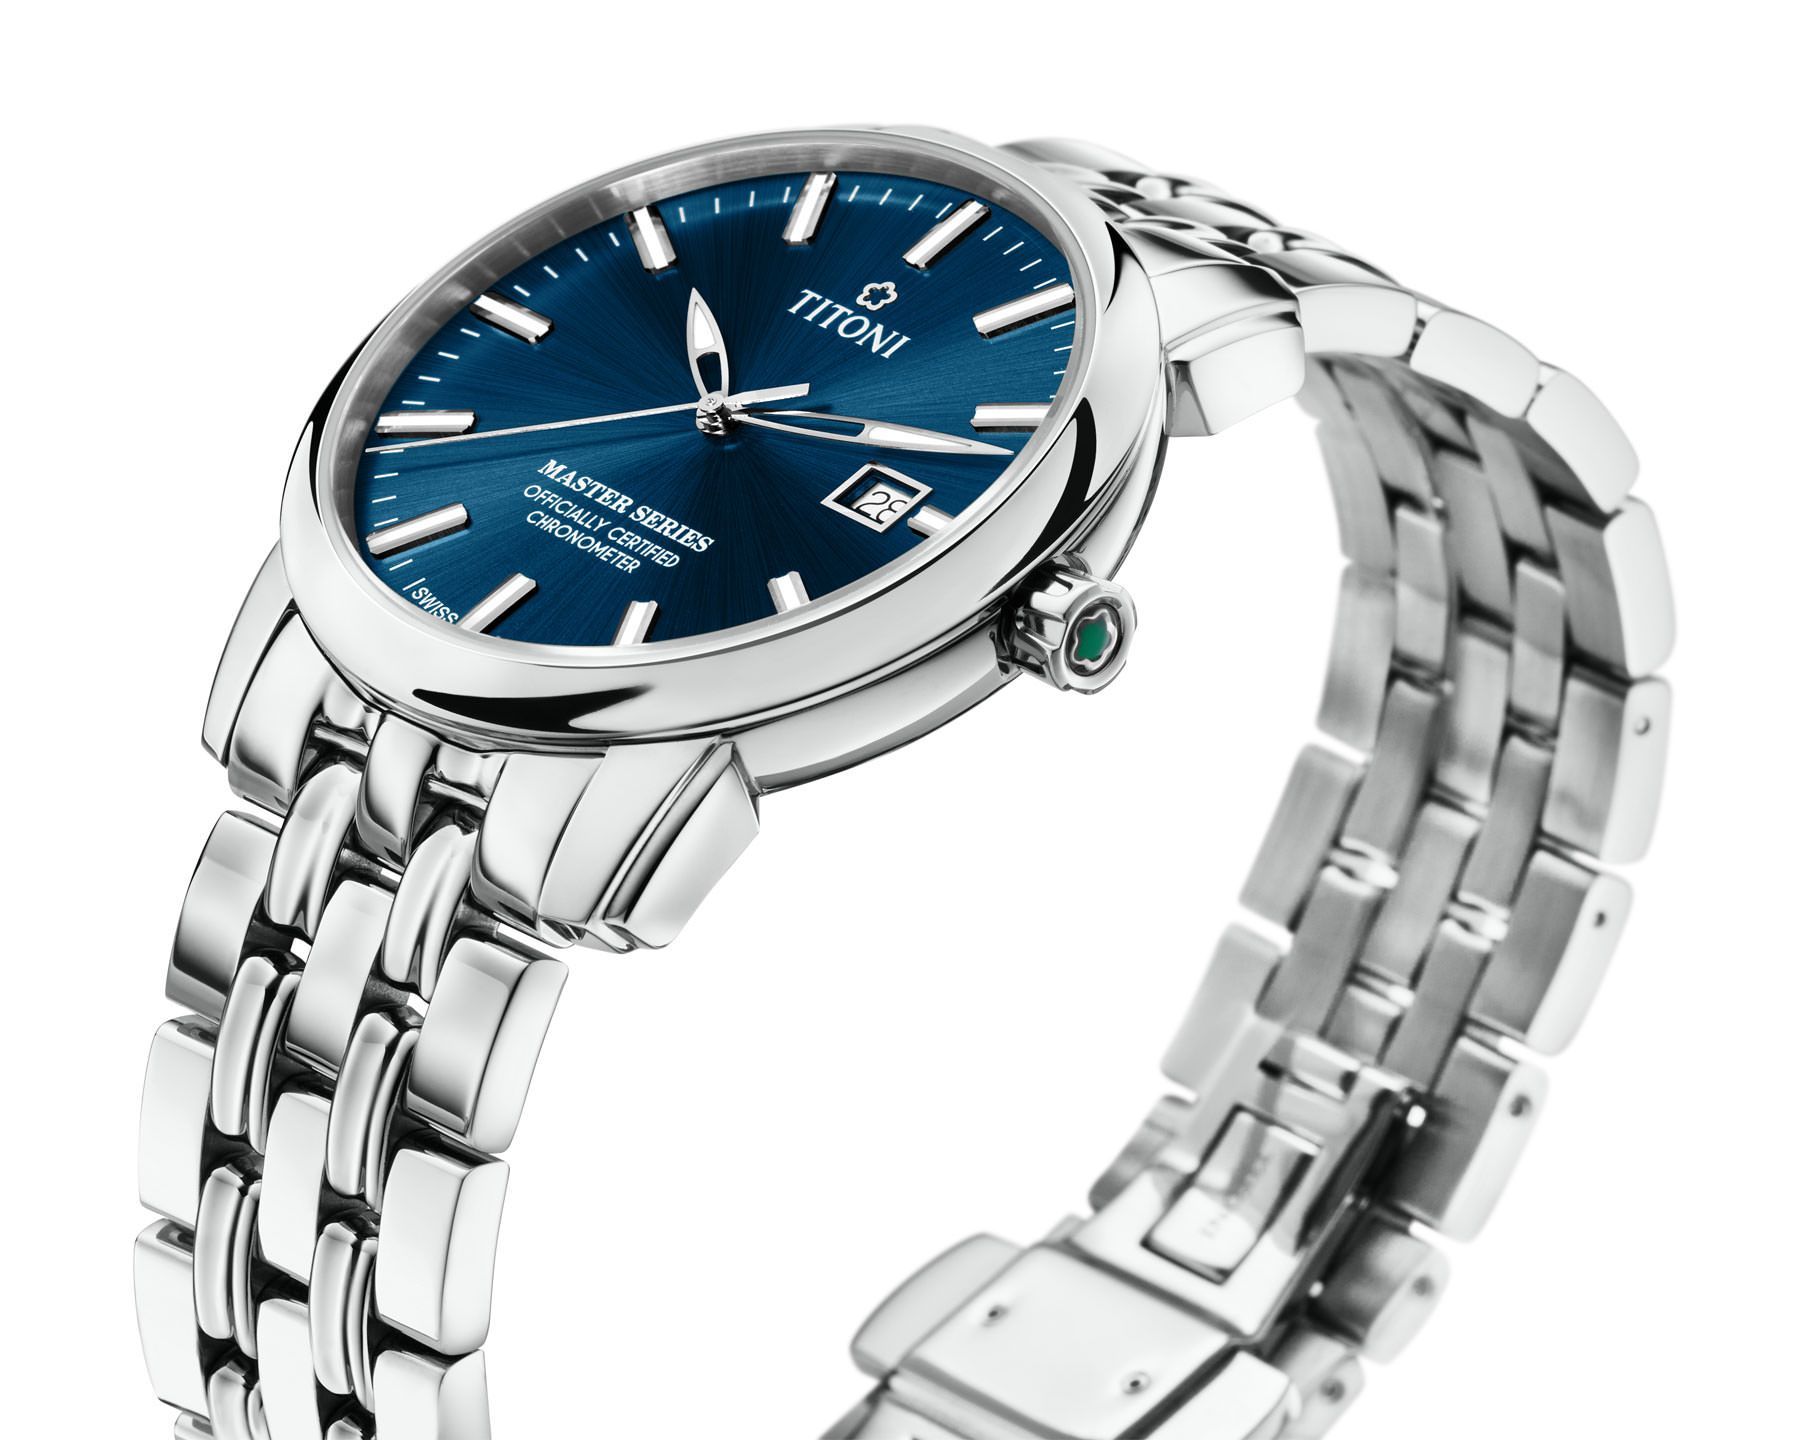 Titoni Master Series  Blue Dial 41 mm Automatic Watch For Men - 2